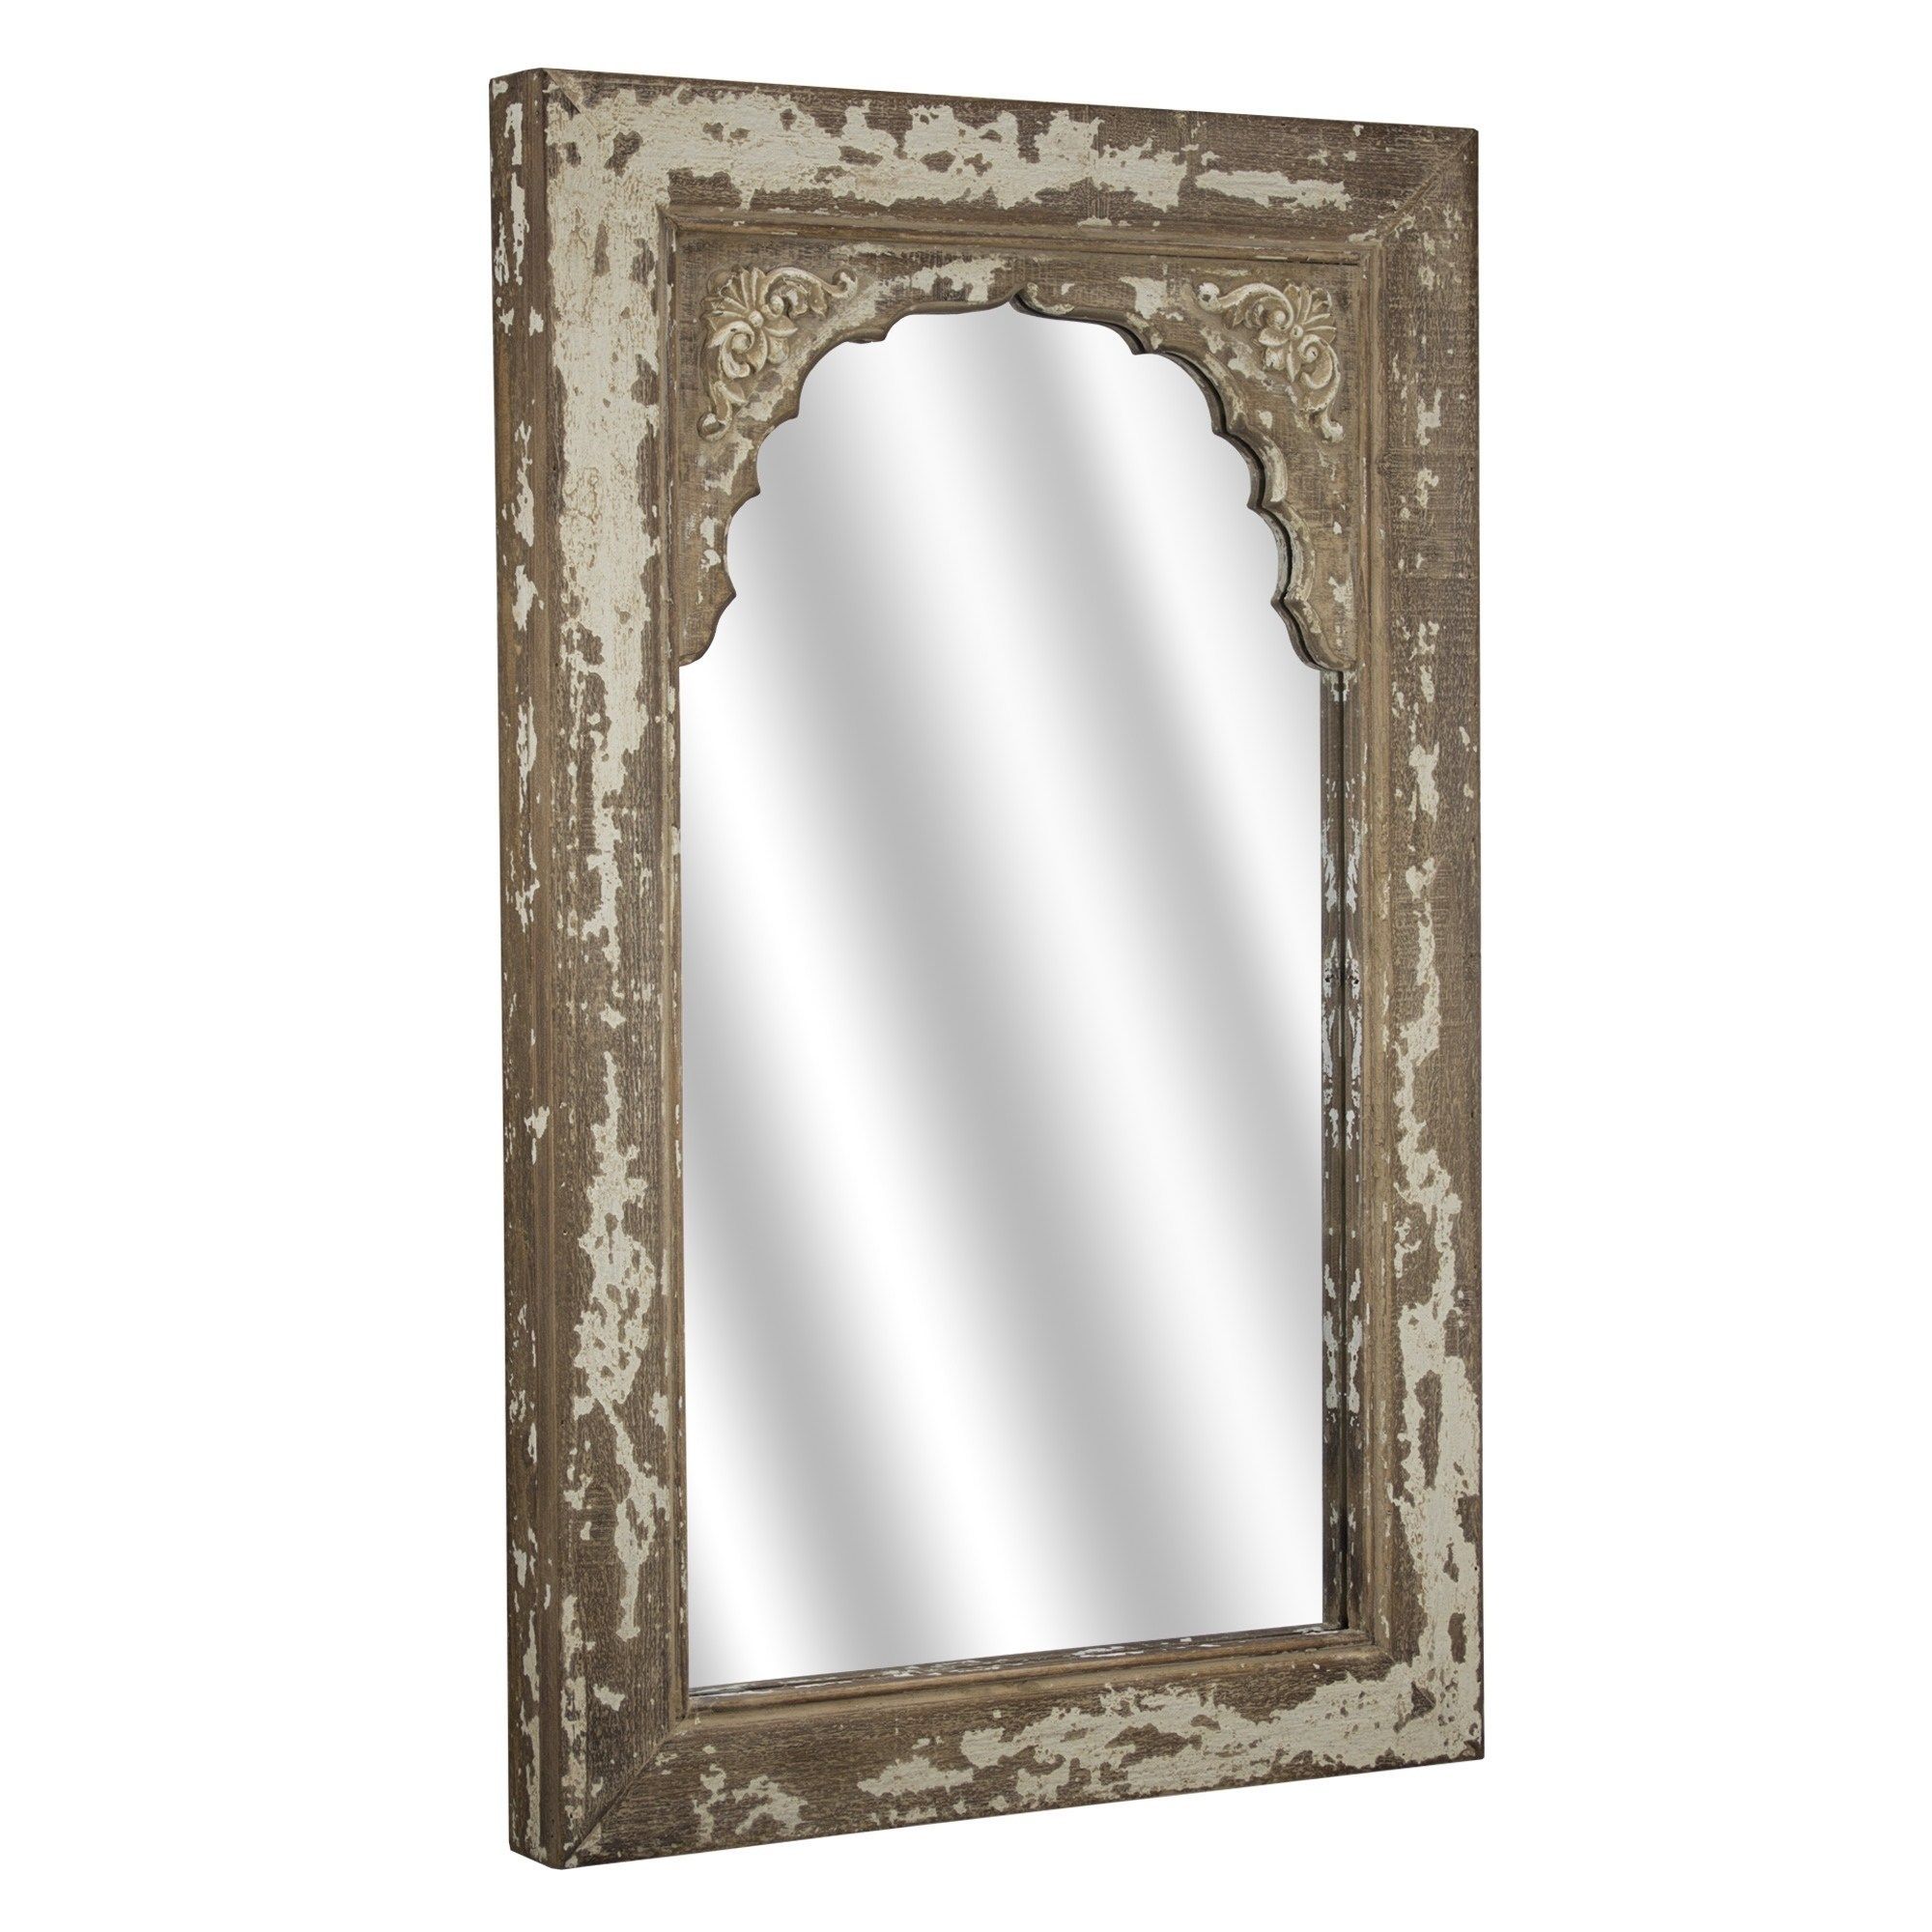 American Art Decor Rustic Shabby Chic Wood Hanging Wall Vanity Mirror With American Made Accent Wall Mirrors (View 7 of 15)